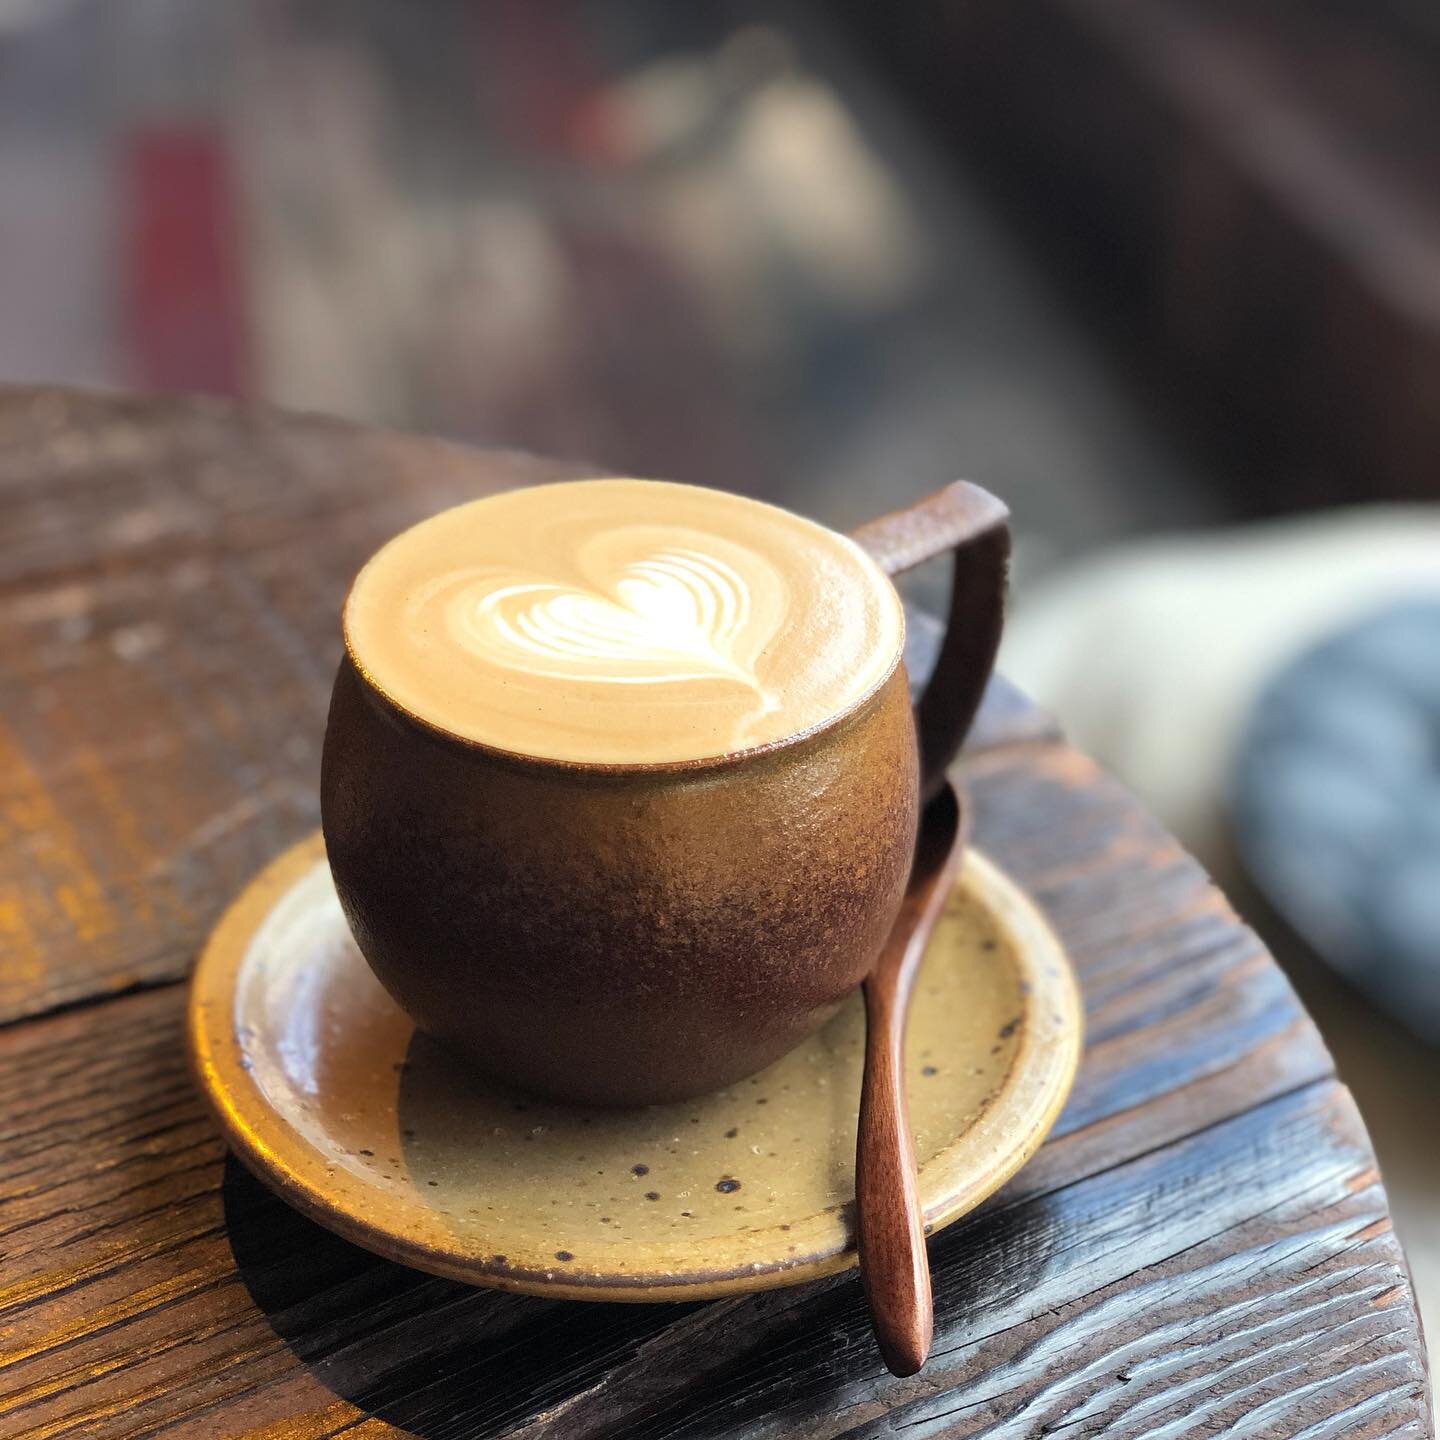 Day 63. Can I please go and enjoy a cup of coffee somewhere chill now?

#shanghai #shanghailockdown #chinalife #coffee #coffeetime #coffeelover #needacuppa #caffeinetime #shanghaicoffeeshops